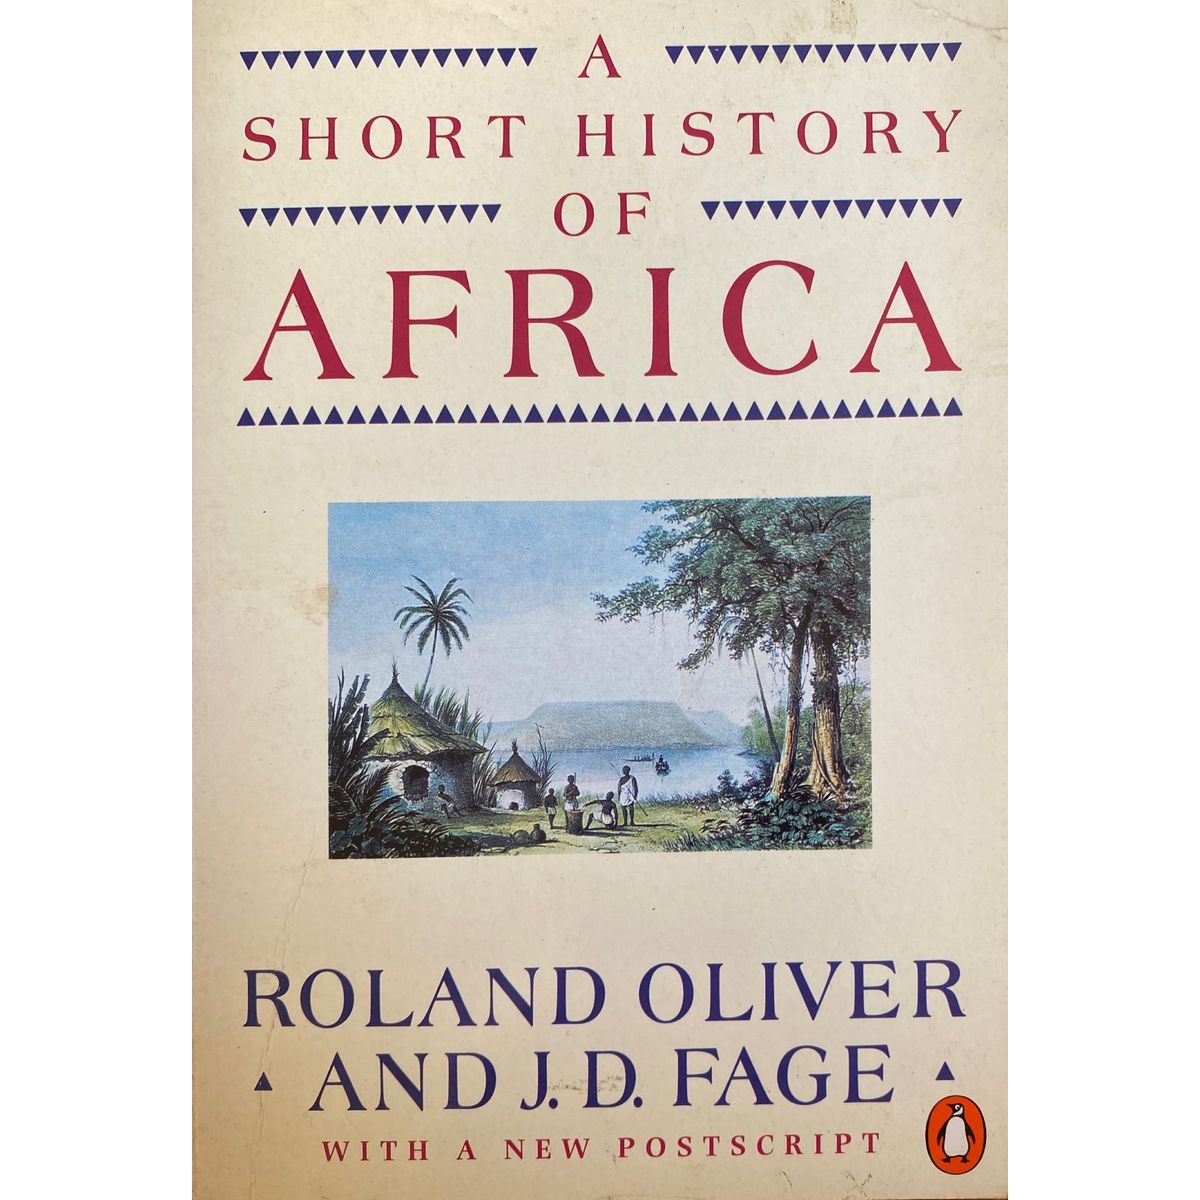 ISBN: 9780140136012 / 0140136010 - A Short History Of Africa by Roland Oliver and J.D. Fage, 6th Edition [1990]